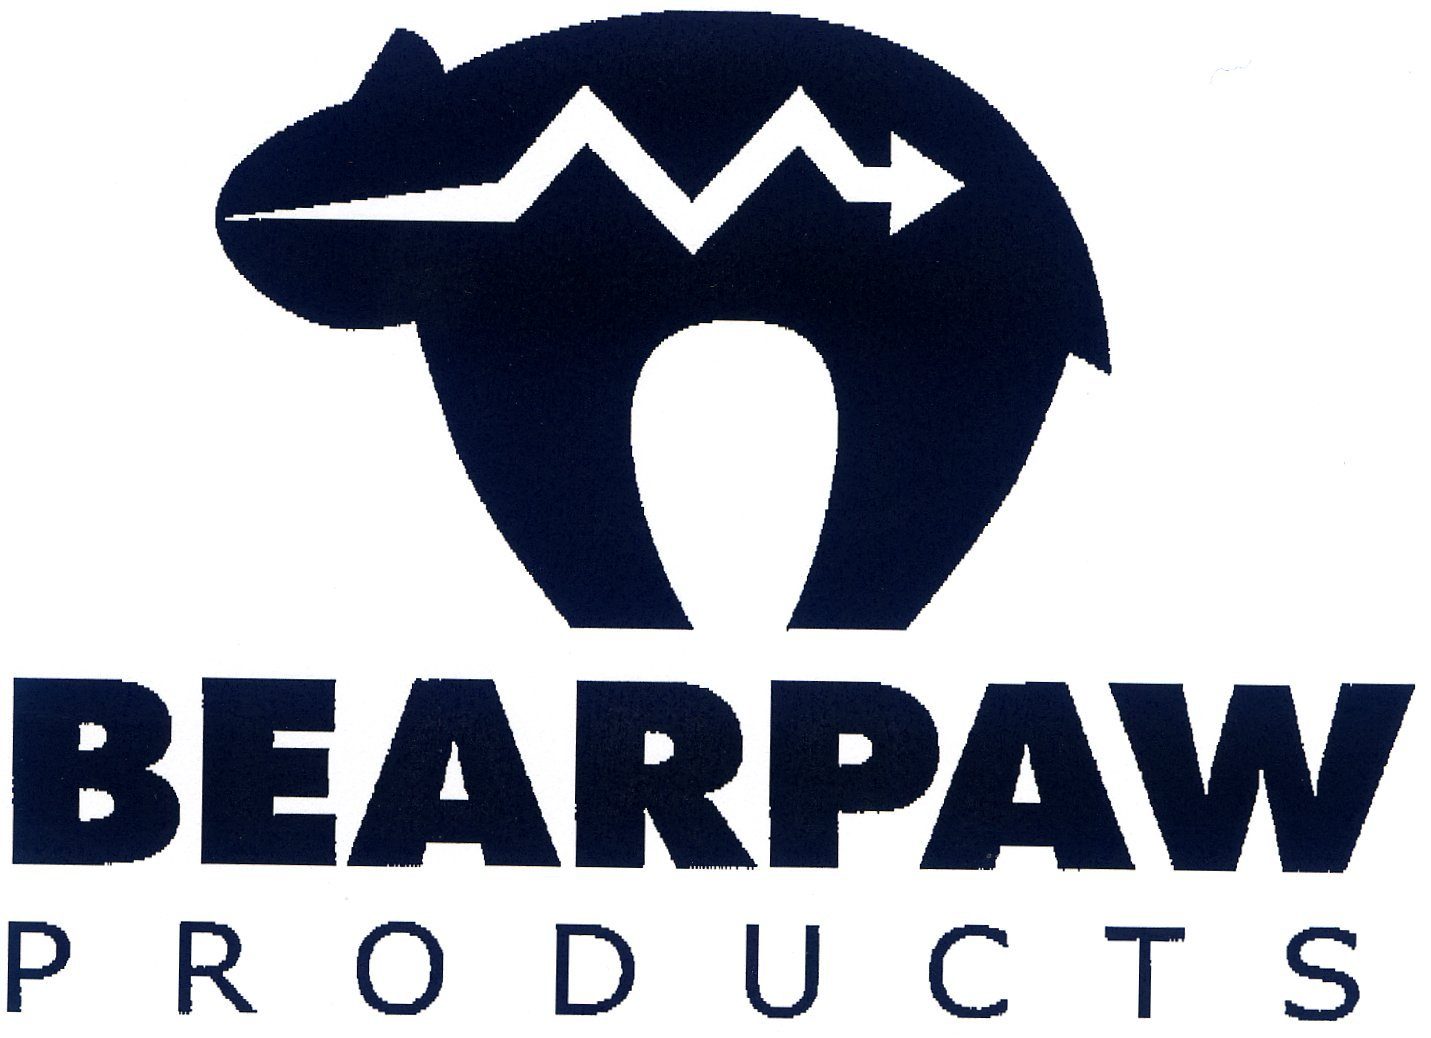 BEARPAW PRODUCTS